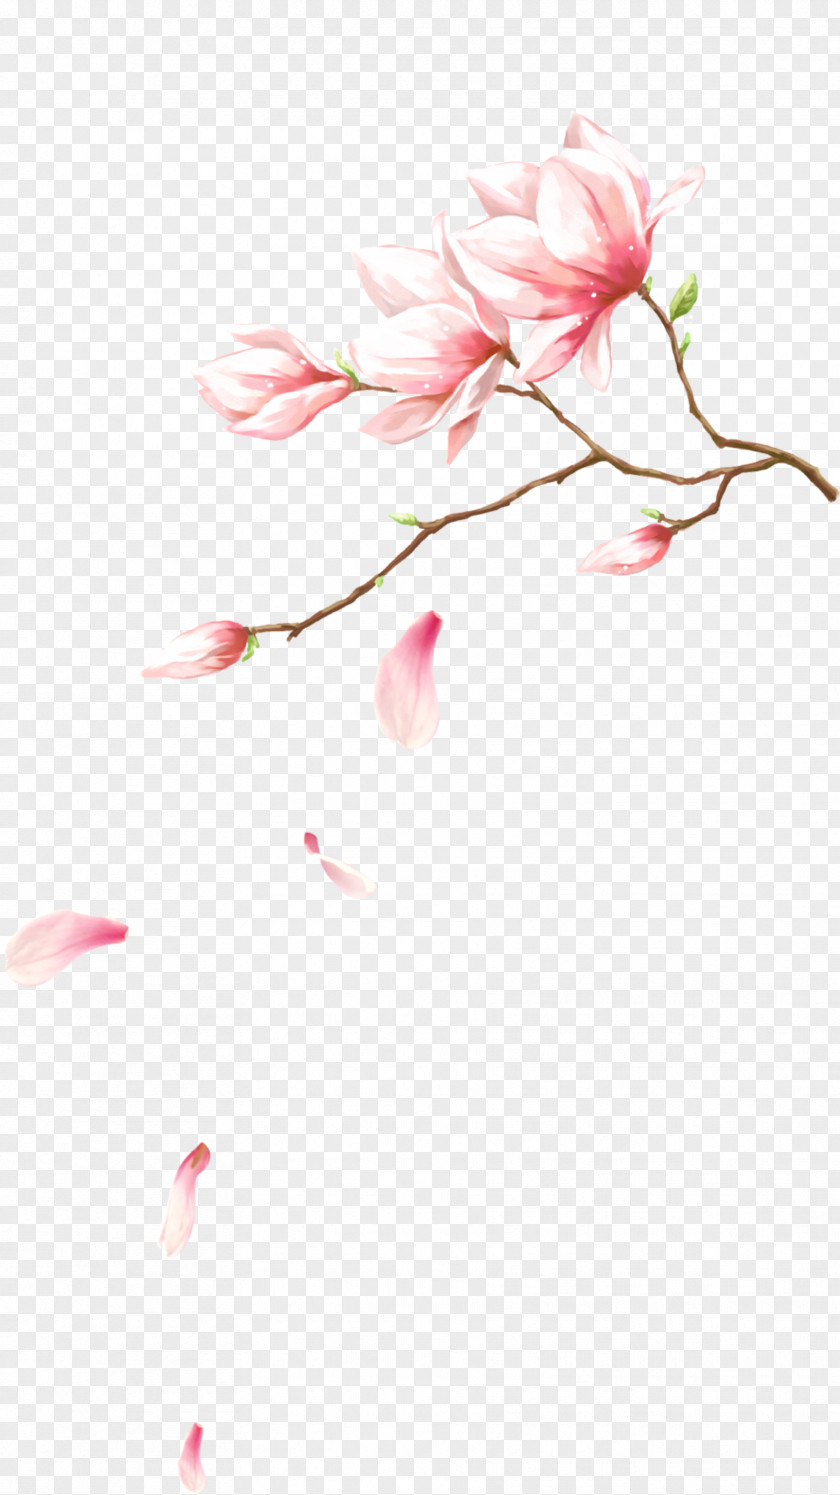 Flowers With Petals Falling On Pink Petal Computer File PNG